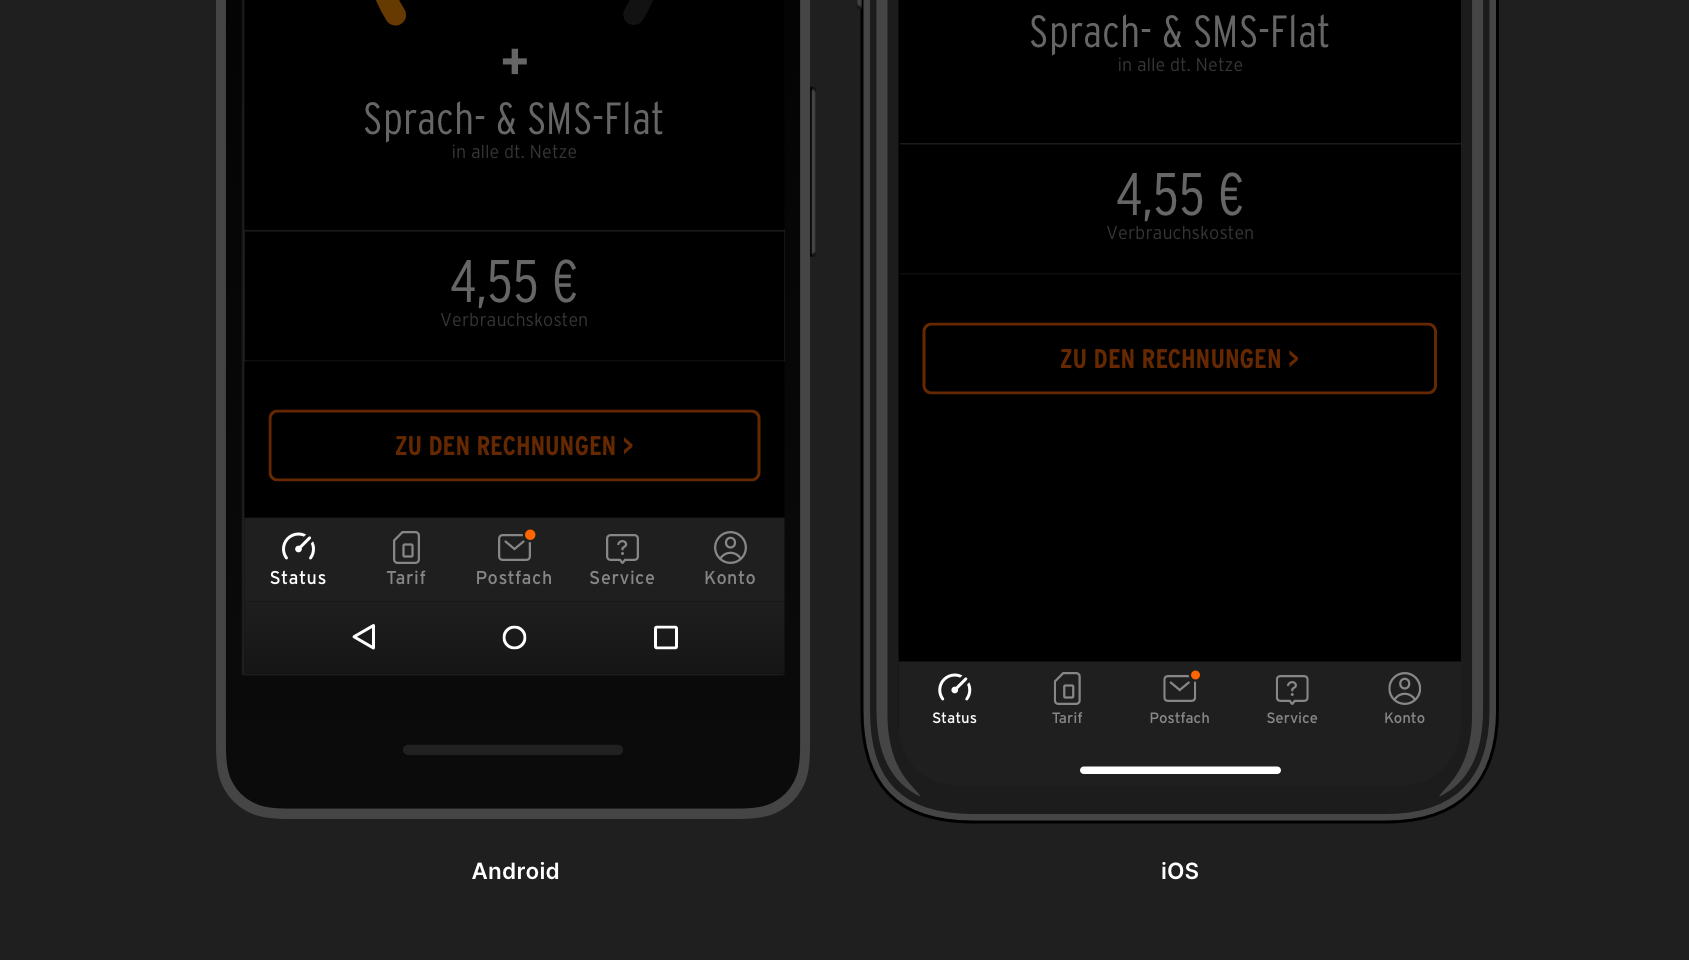 An Android smartphone on the left, an iPhone on the right. Both show the otelo app with a menu on the bottom of the screen.